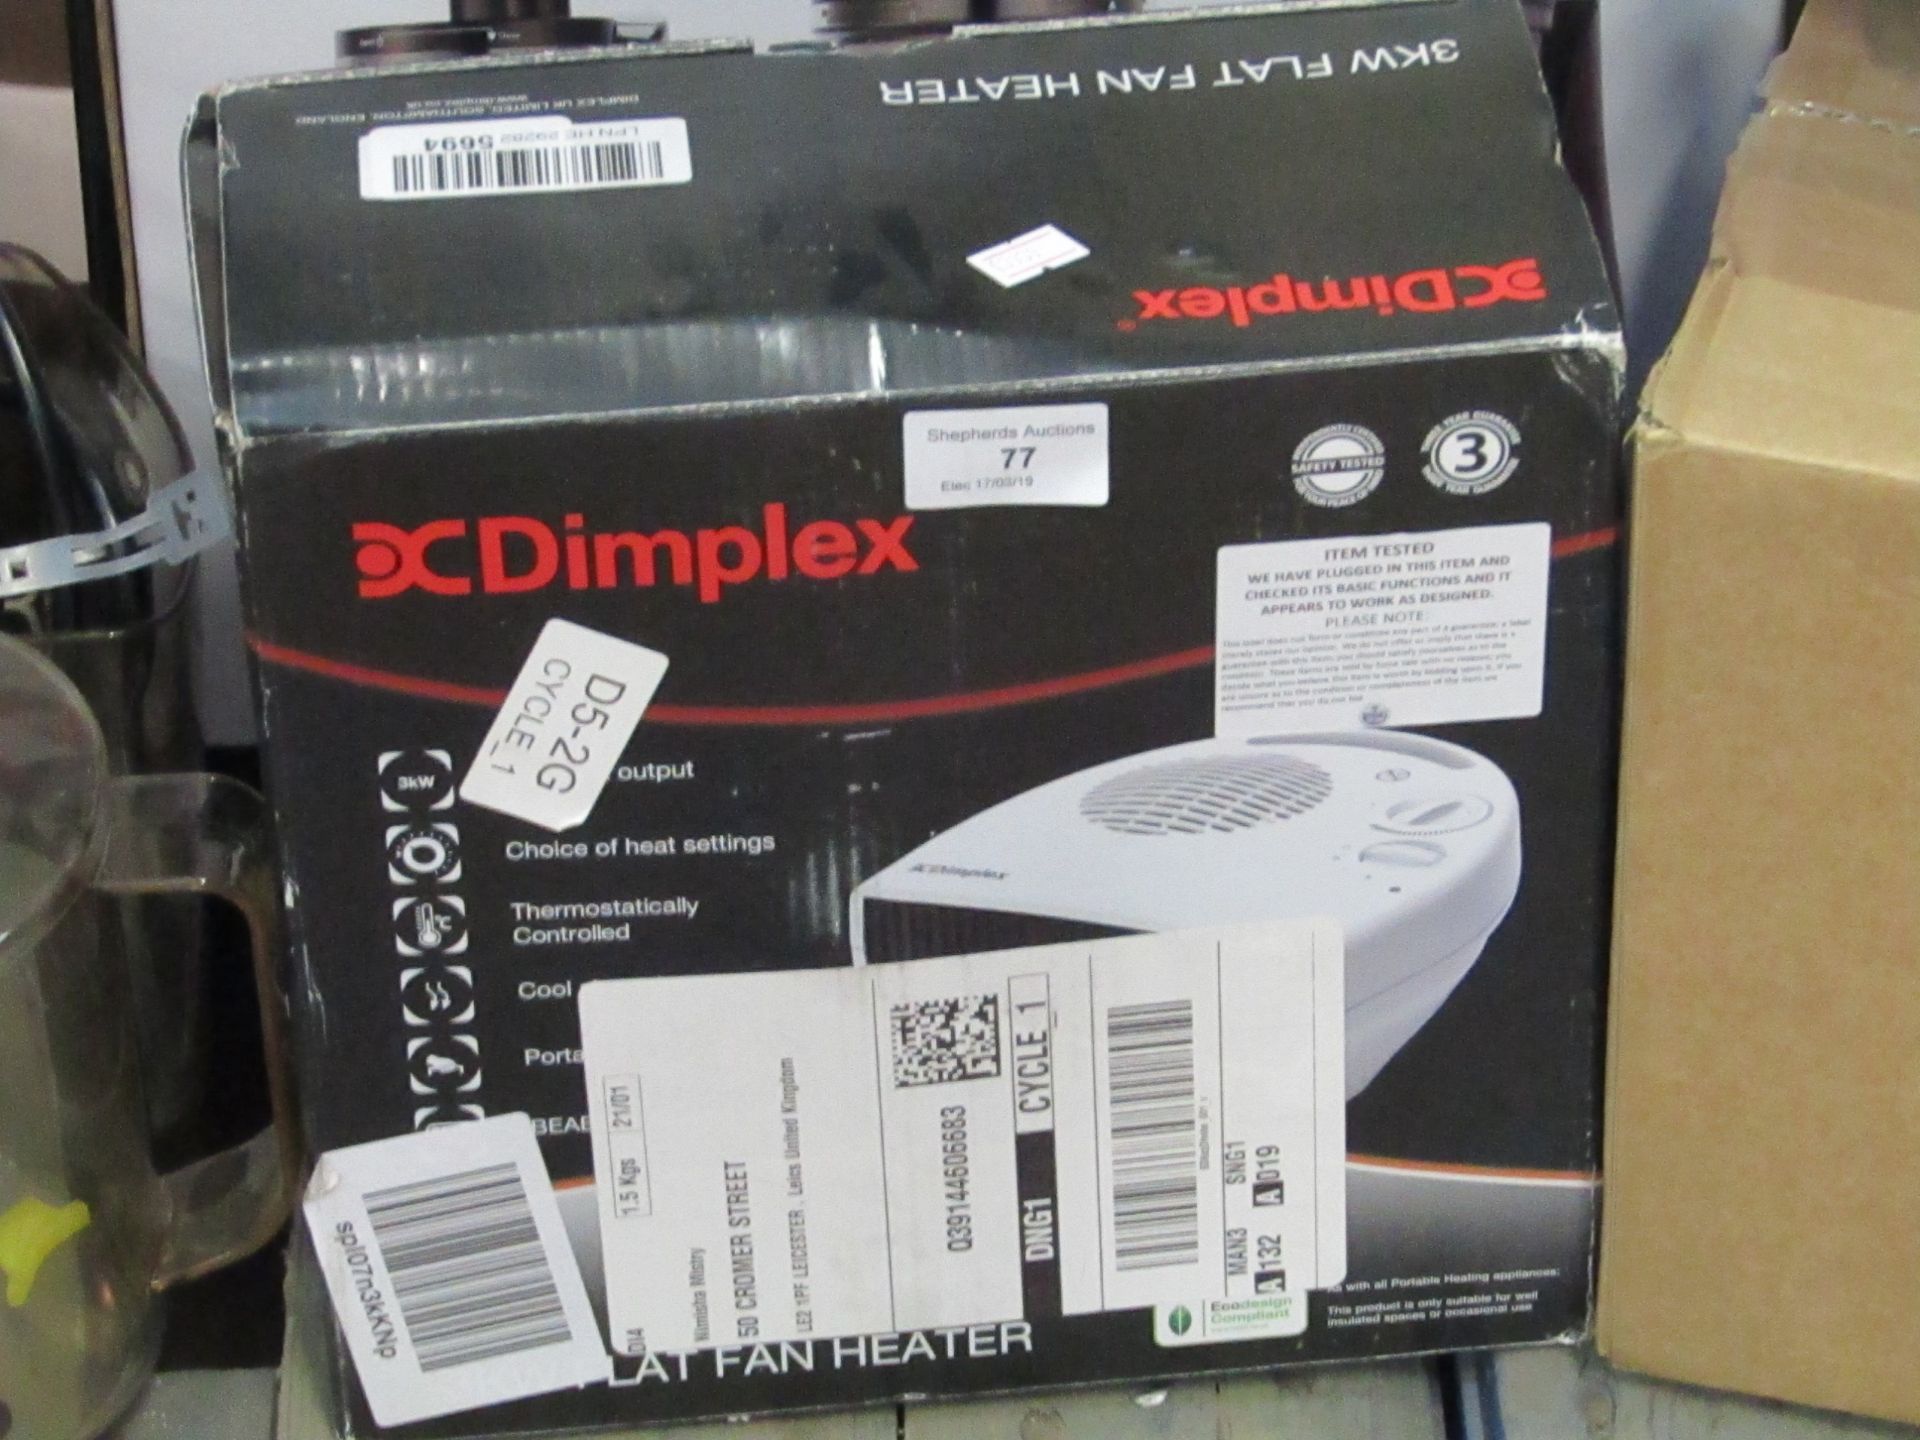 DC Dimplex heater, tested working and boxed